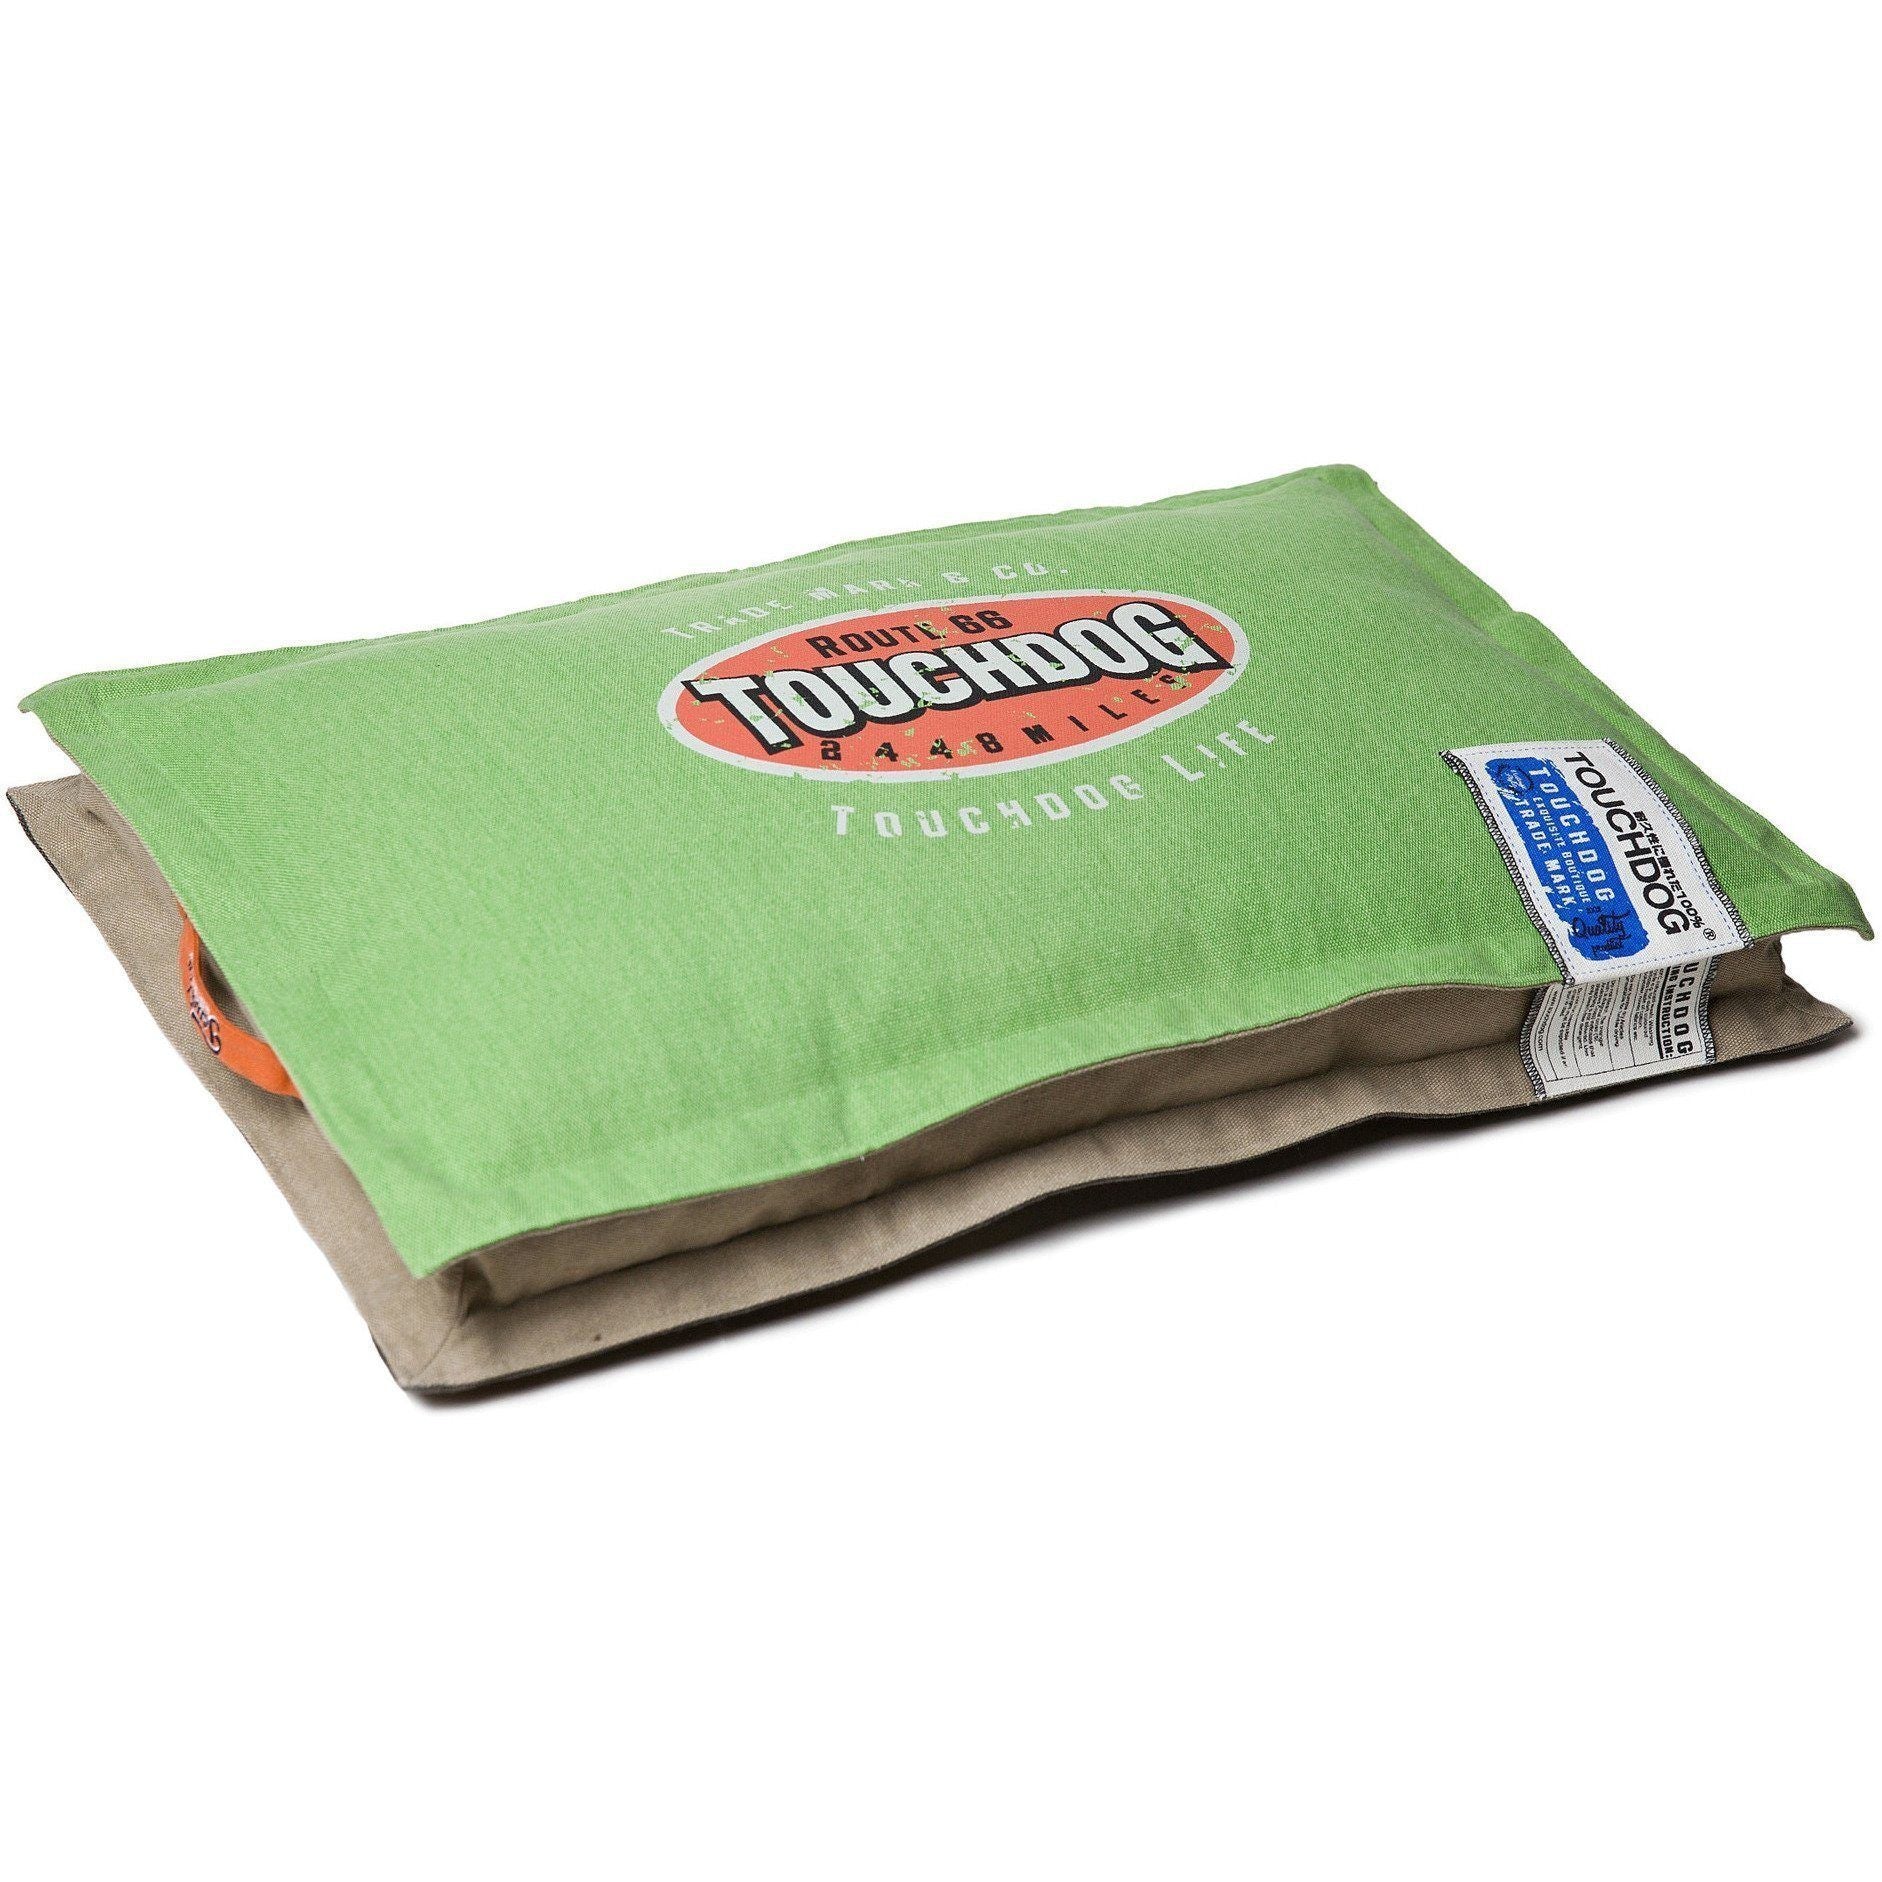 Touchdog ® 'Shock-Stitched' Sporty Reversible Rectangular Ultra-Thick Dog Mat Bed Large Mint Green, Mocha Brown